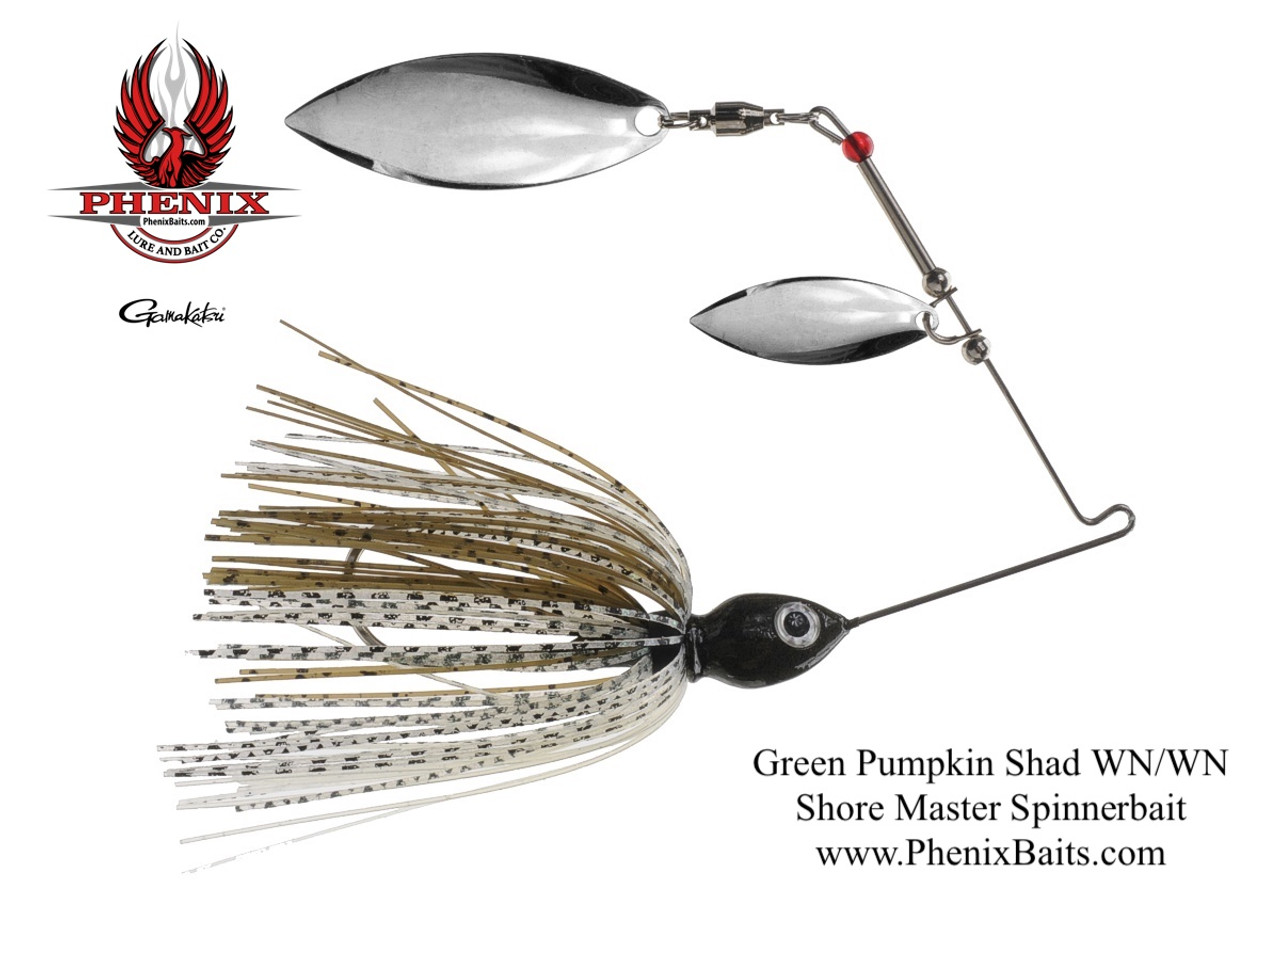 Phenix Shore Master Spinnerbait - Green Pumpkin Shad with Double Willow  Nickel Blades